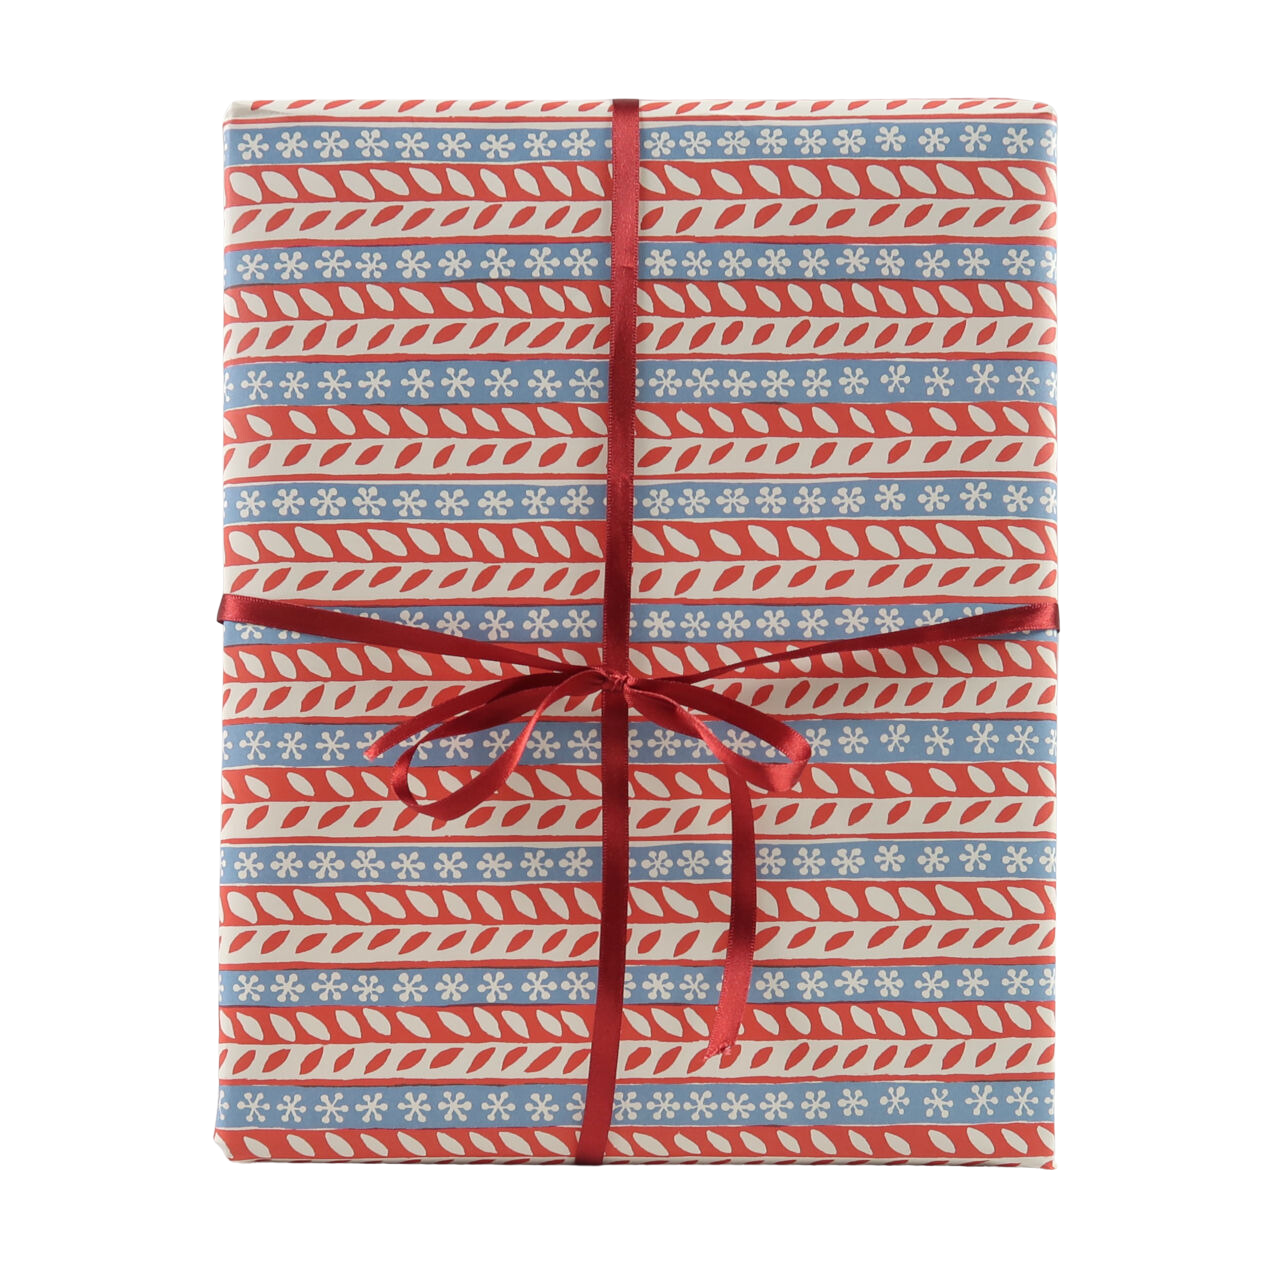 Cambridge Imprint Merry Christmas Red & Blue Patterned Paper - 10 Sheets